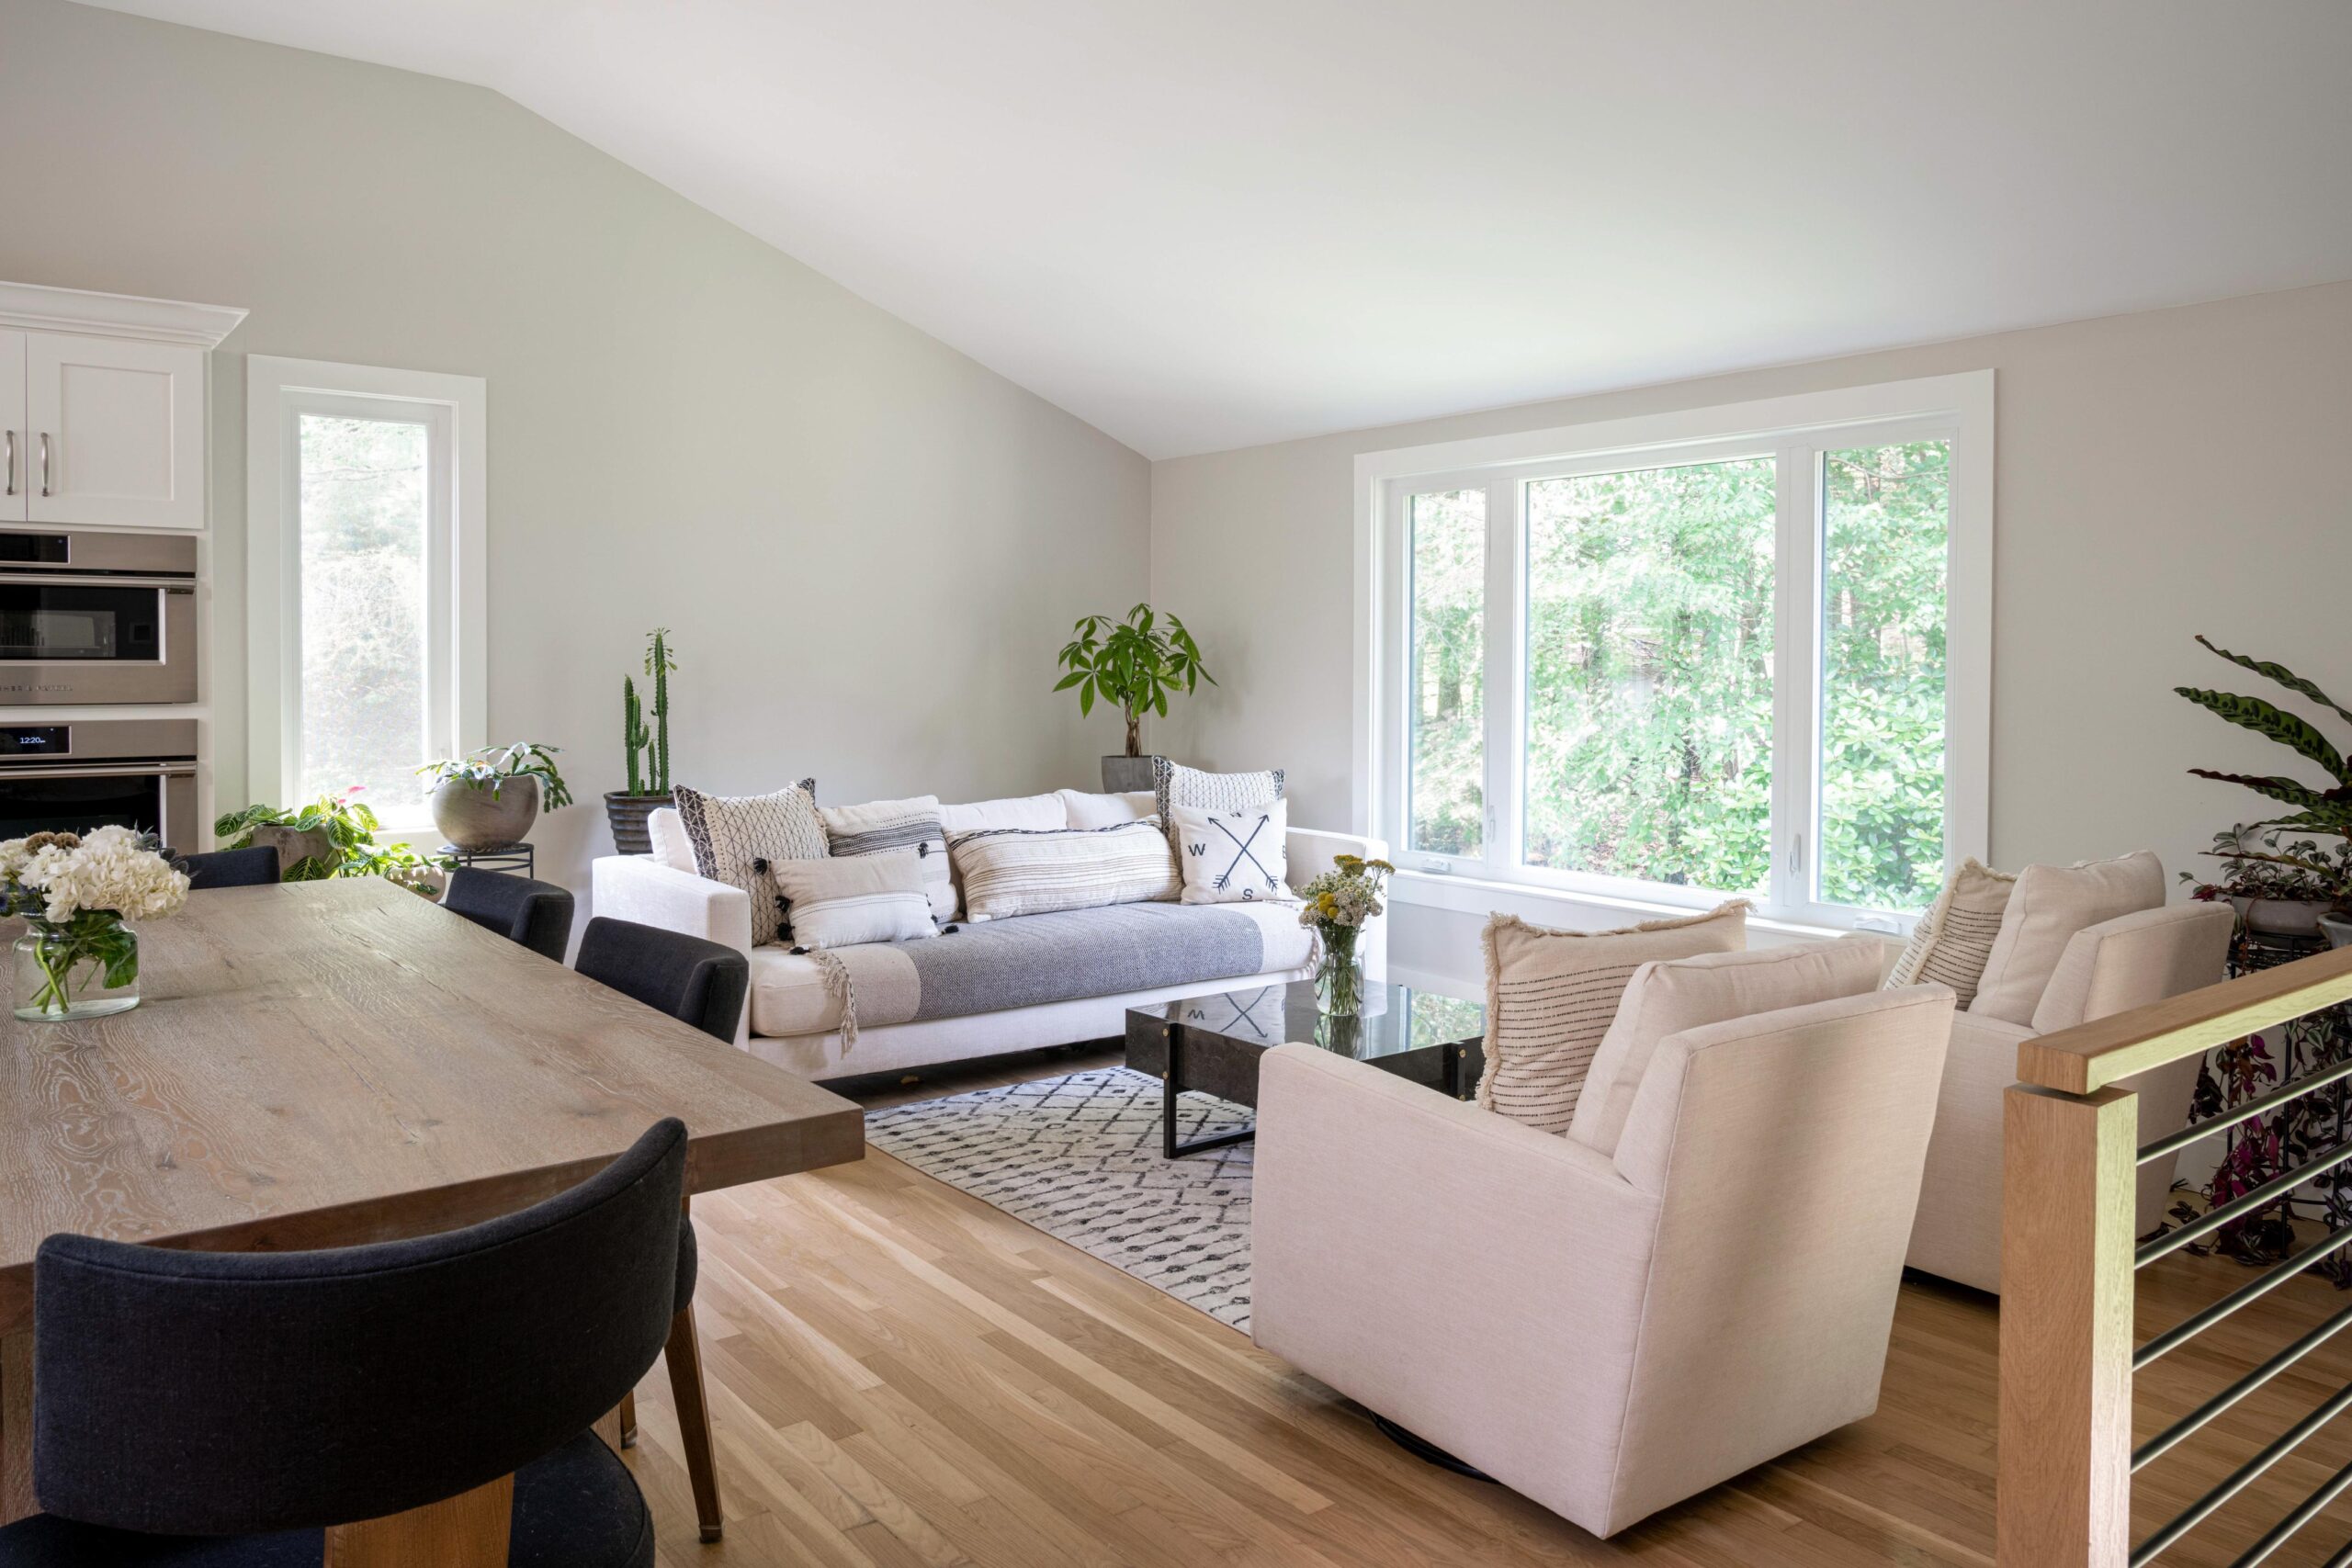 An open layout was crucial for homeowners who value conversation and entertaining